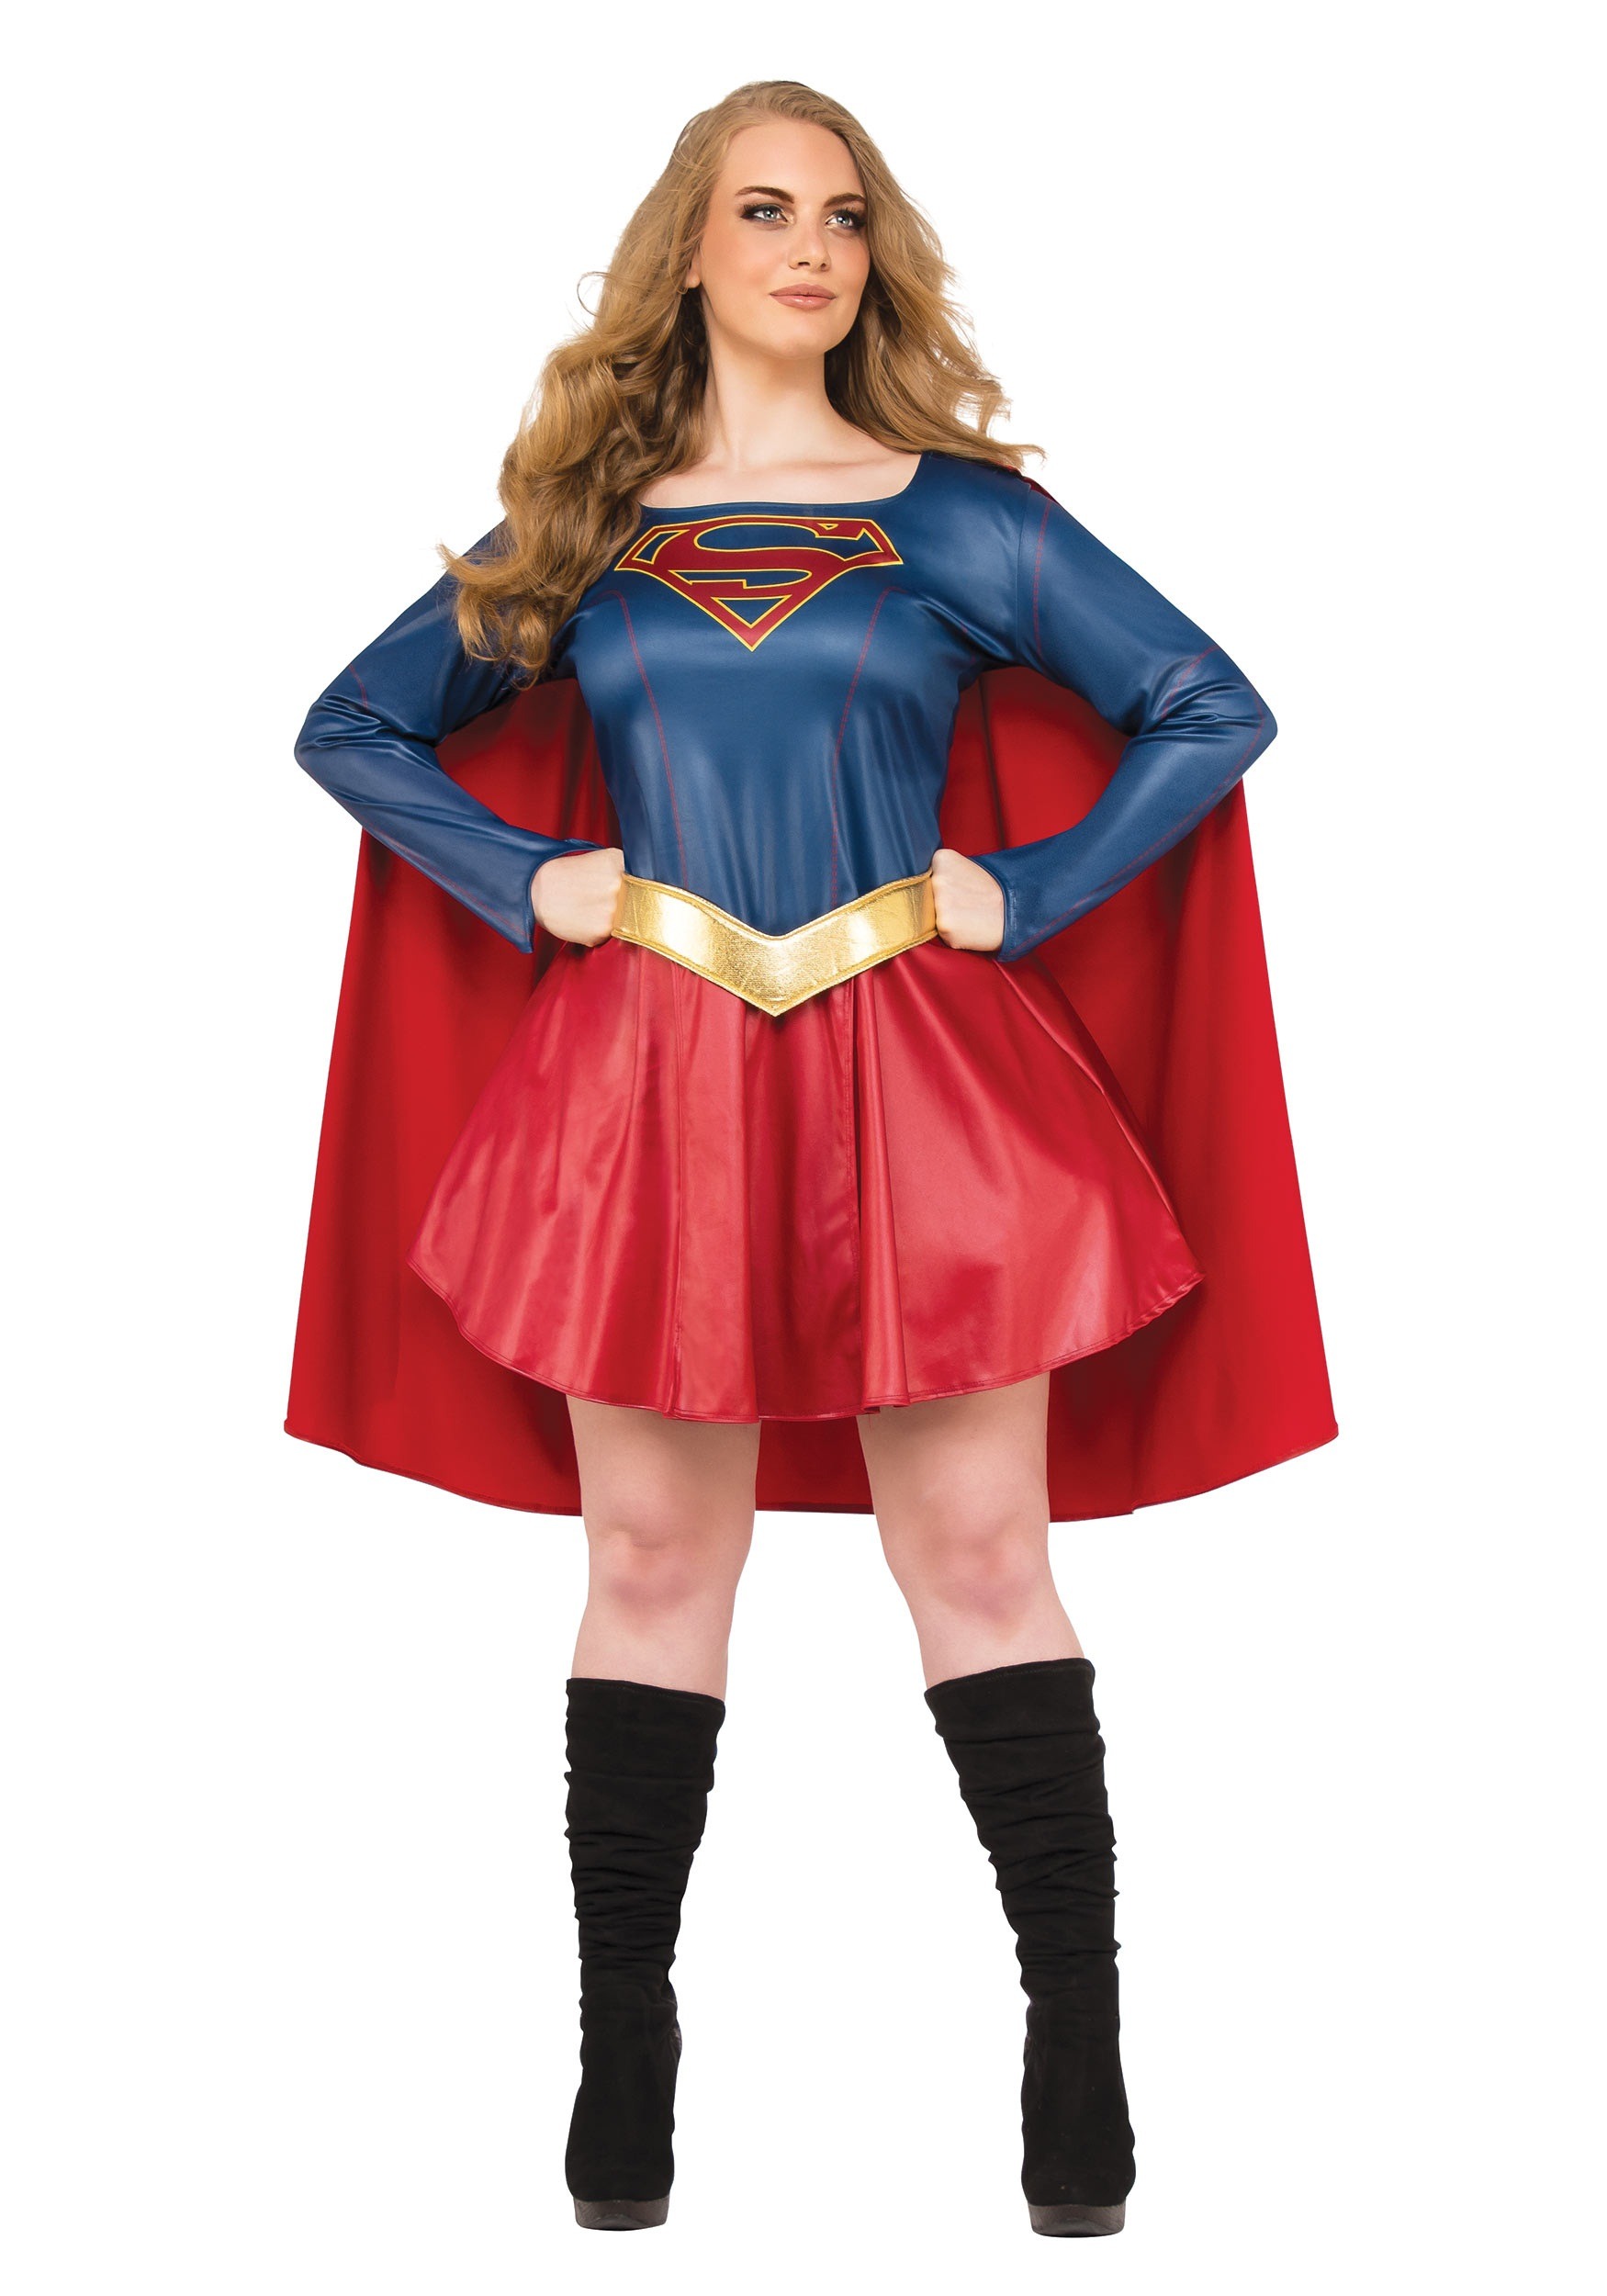 Can plus size women cosplay superheroes